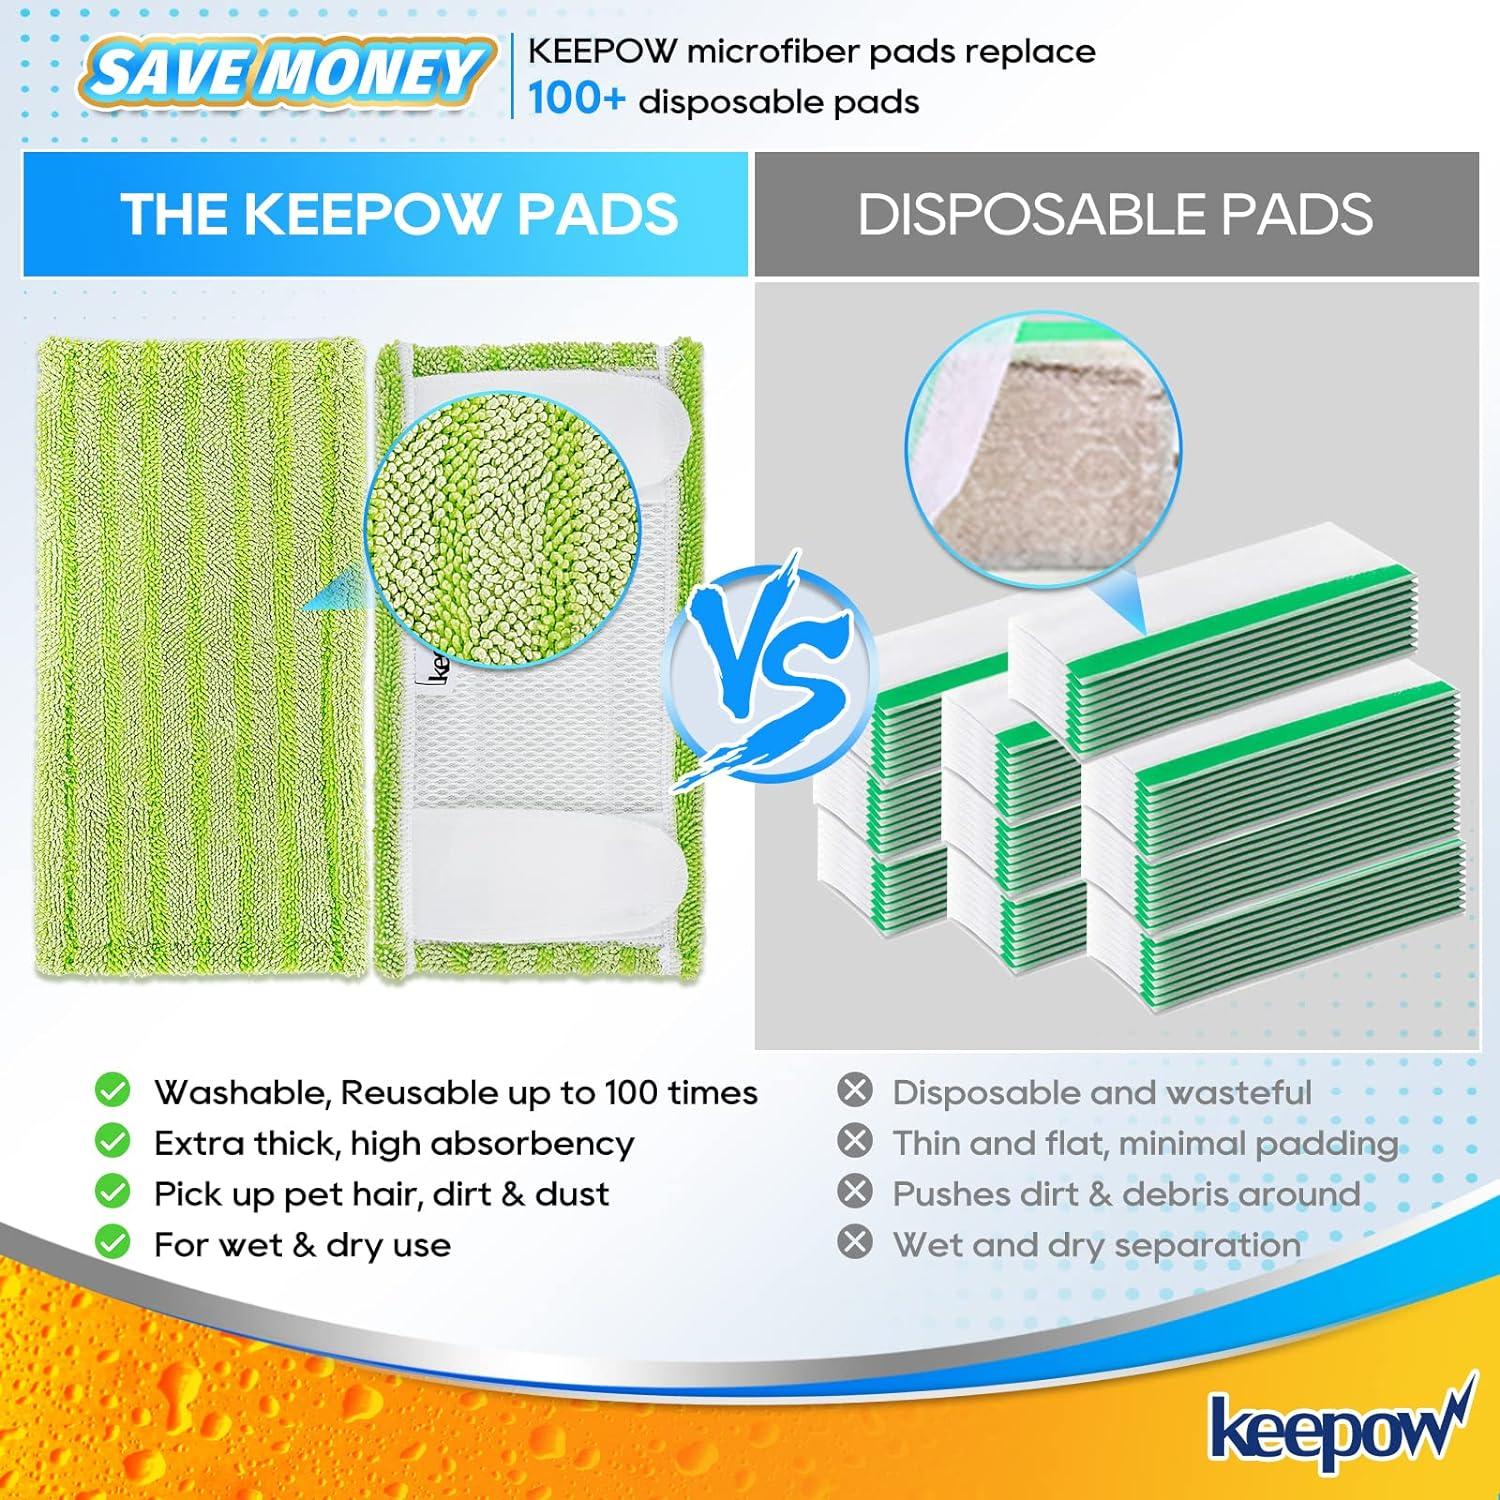 Reusable Mop Pads Compatible with Swiffer Wet Jet Mop- 6 Pack Wet Pads  Refill Washable Microfiber Mop Pads Wet Dry Mopping Cloths Replacements for